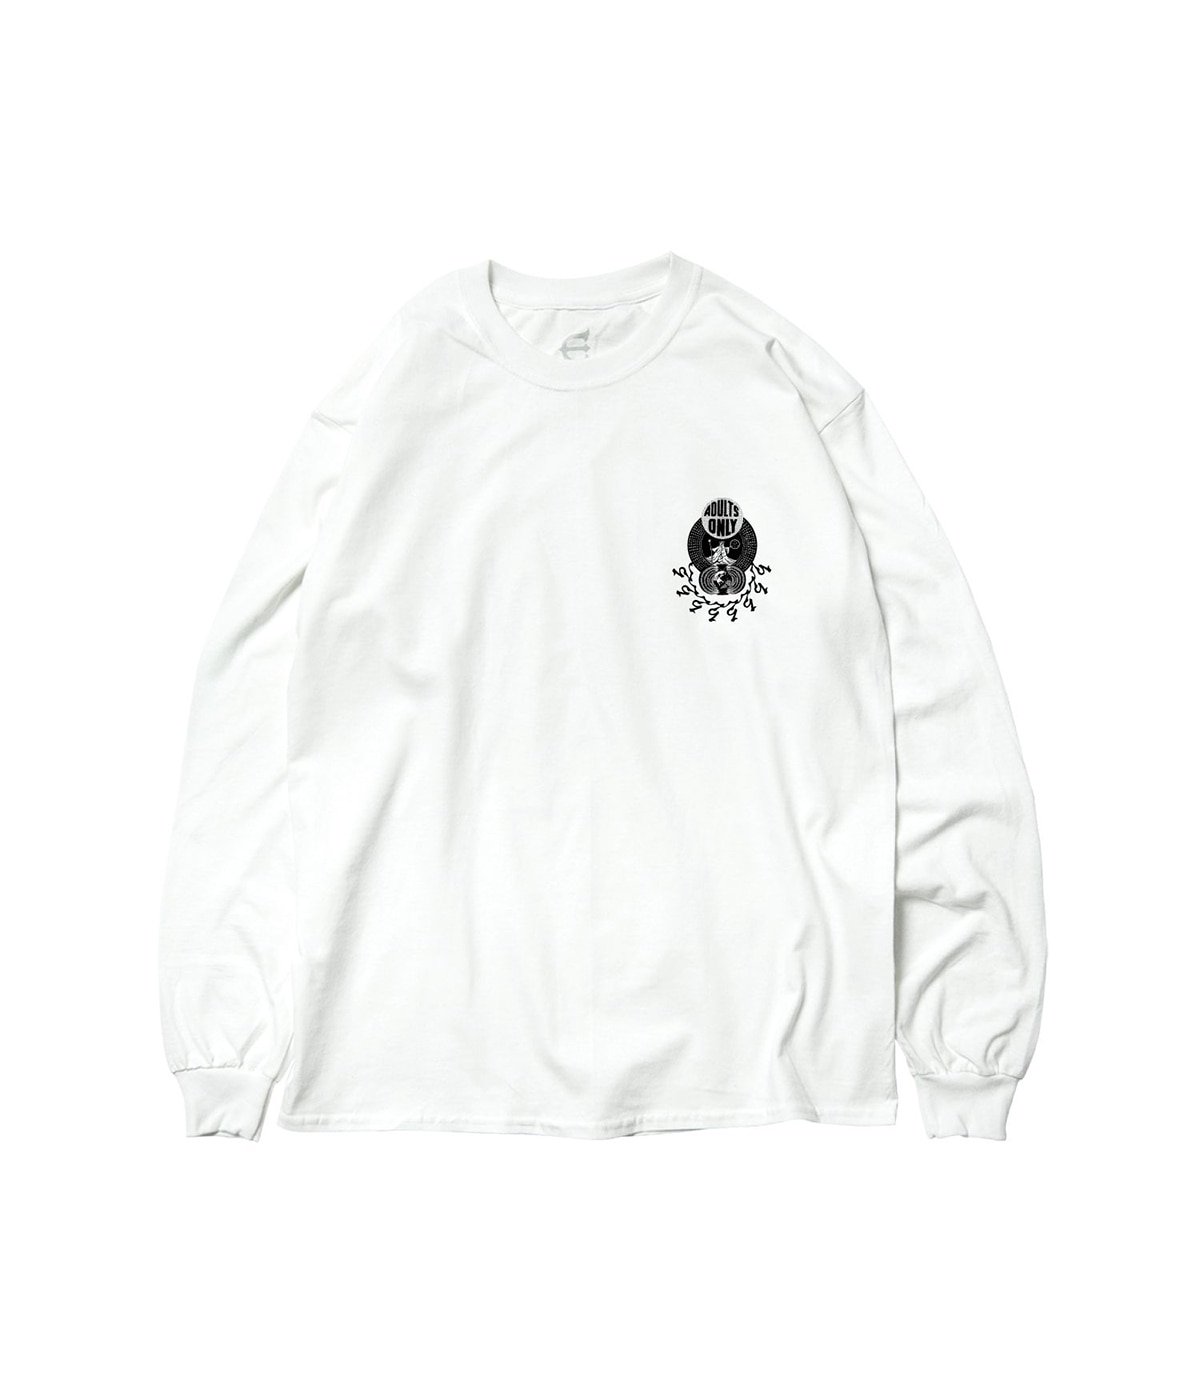 NEO ADULTS ONLY LS | Evisen Skateboardsゑ(エビセン スケートボード 